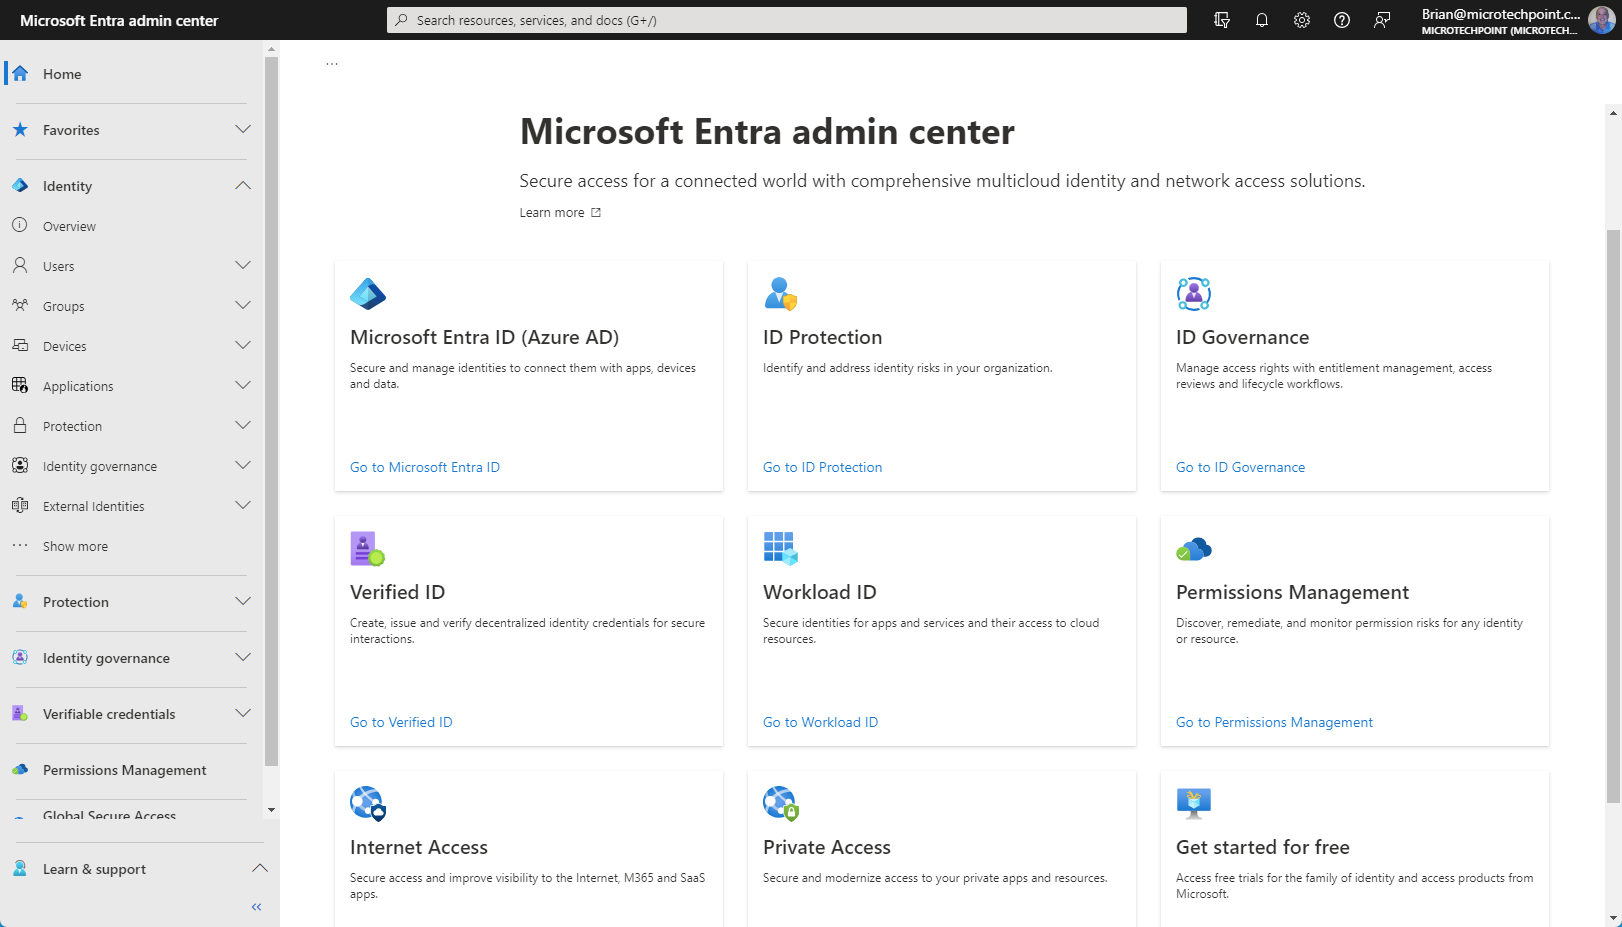 Screenshot of the Microsoft Entra admin center, with tiles containing links to Entra ID, ID Protection, ID Governance, Verified ID, Workload ID, Permissions Management, Internet Access, Private Access, and the option to try the Entra products for free.